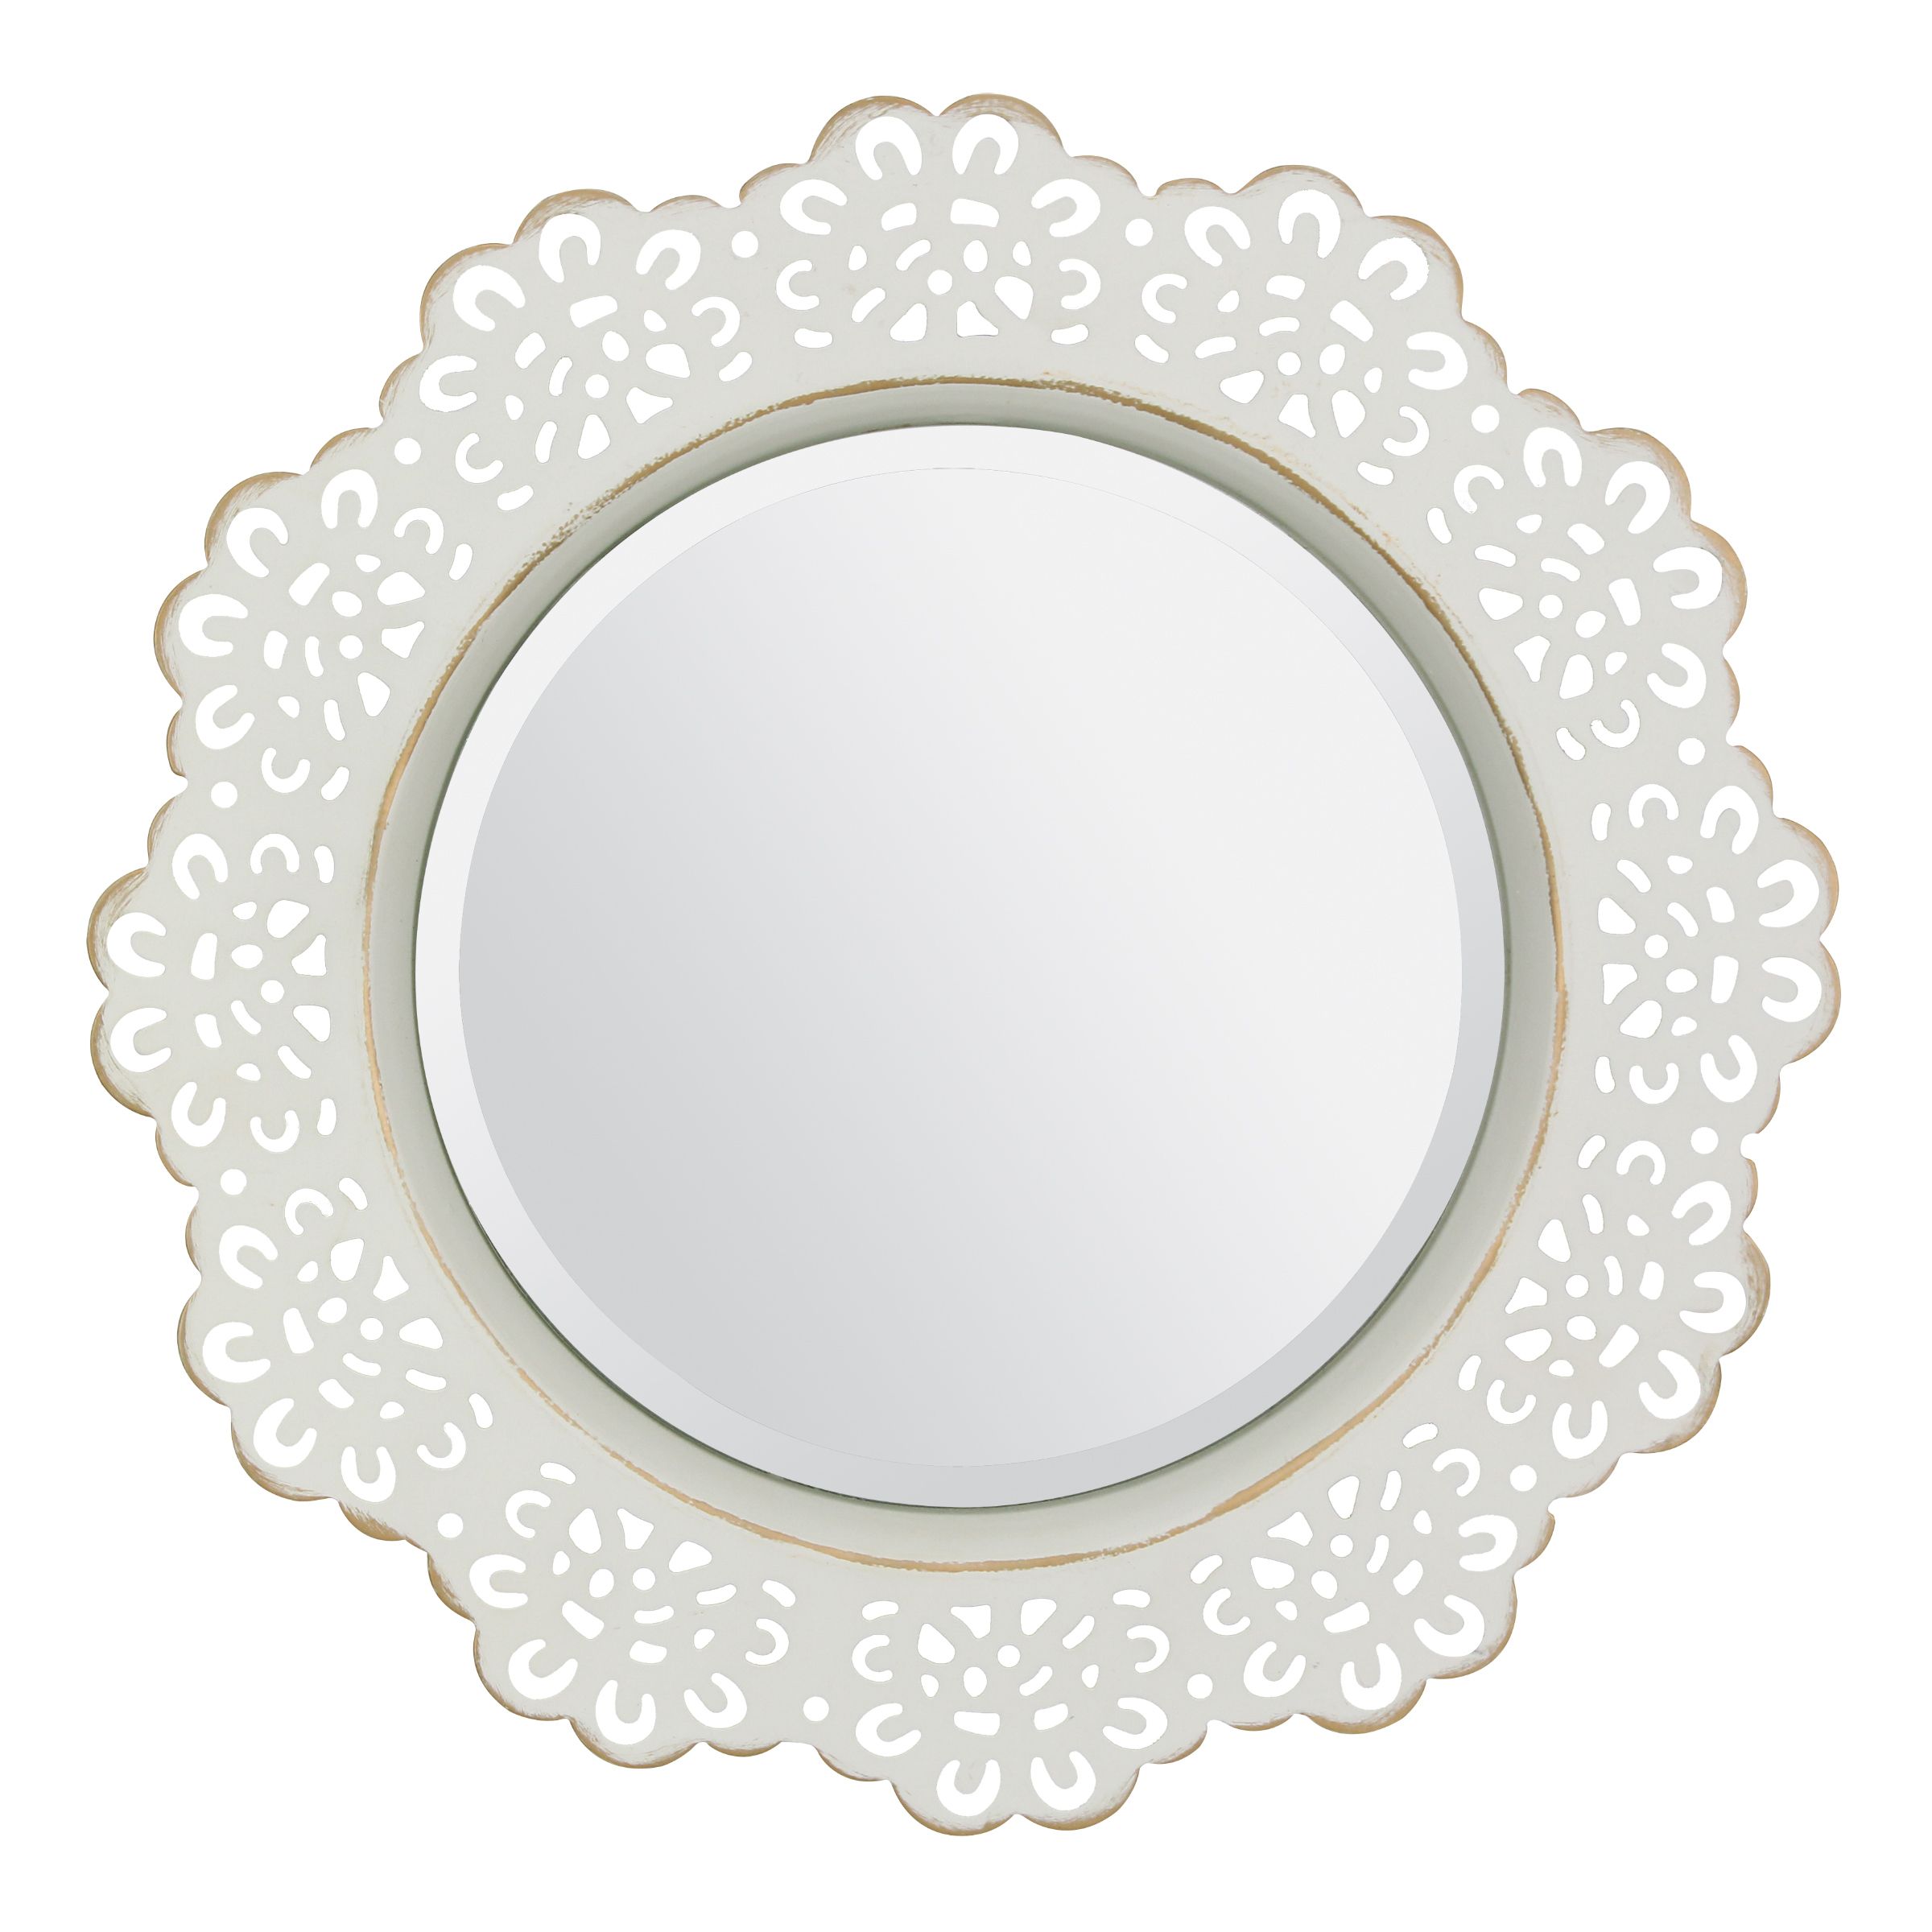 Stonebriar Decorative Round Metal Lace Wall Mirror, White With Gold Within Stitch White Round Wall Mirrors (View 6 of 15)